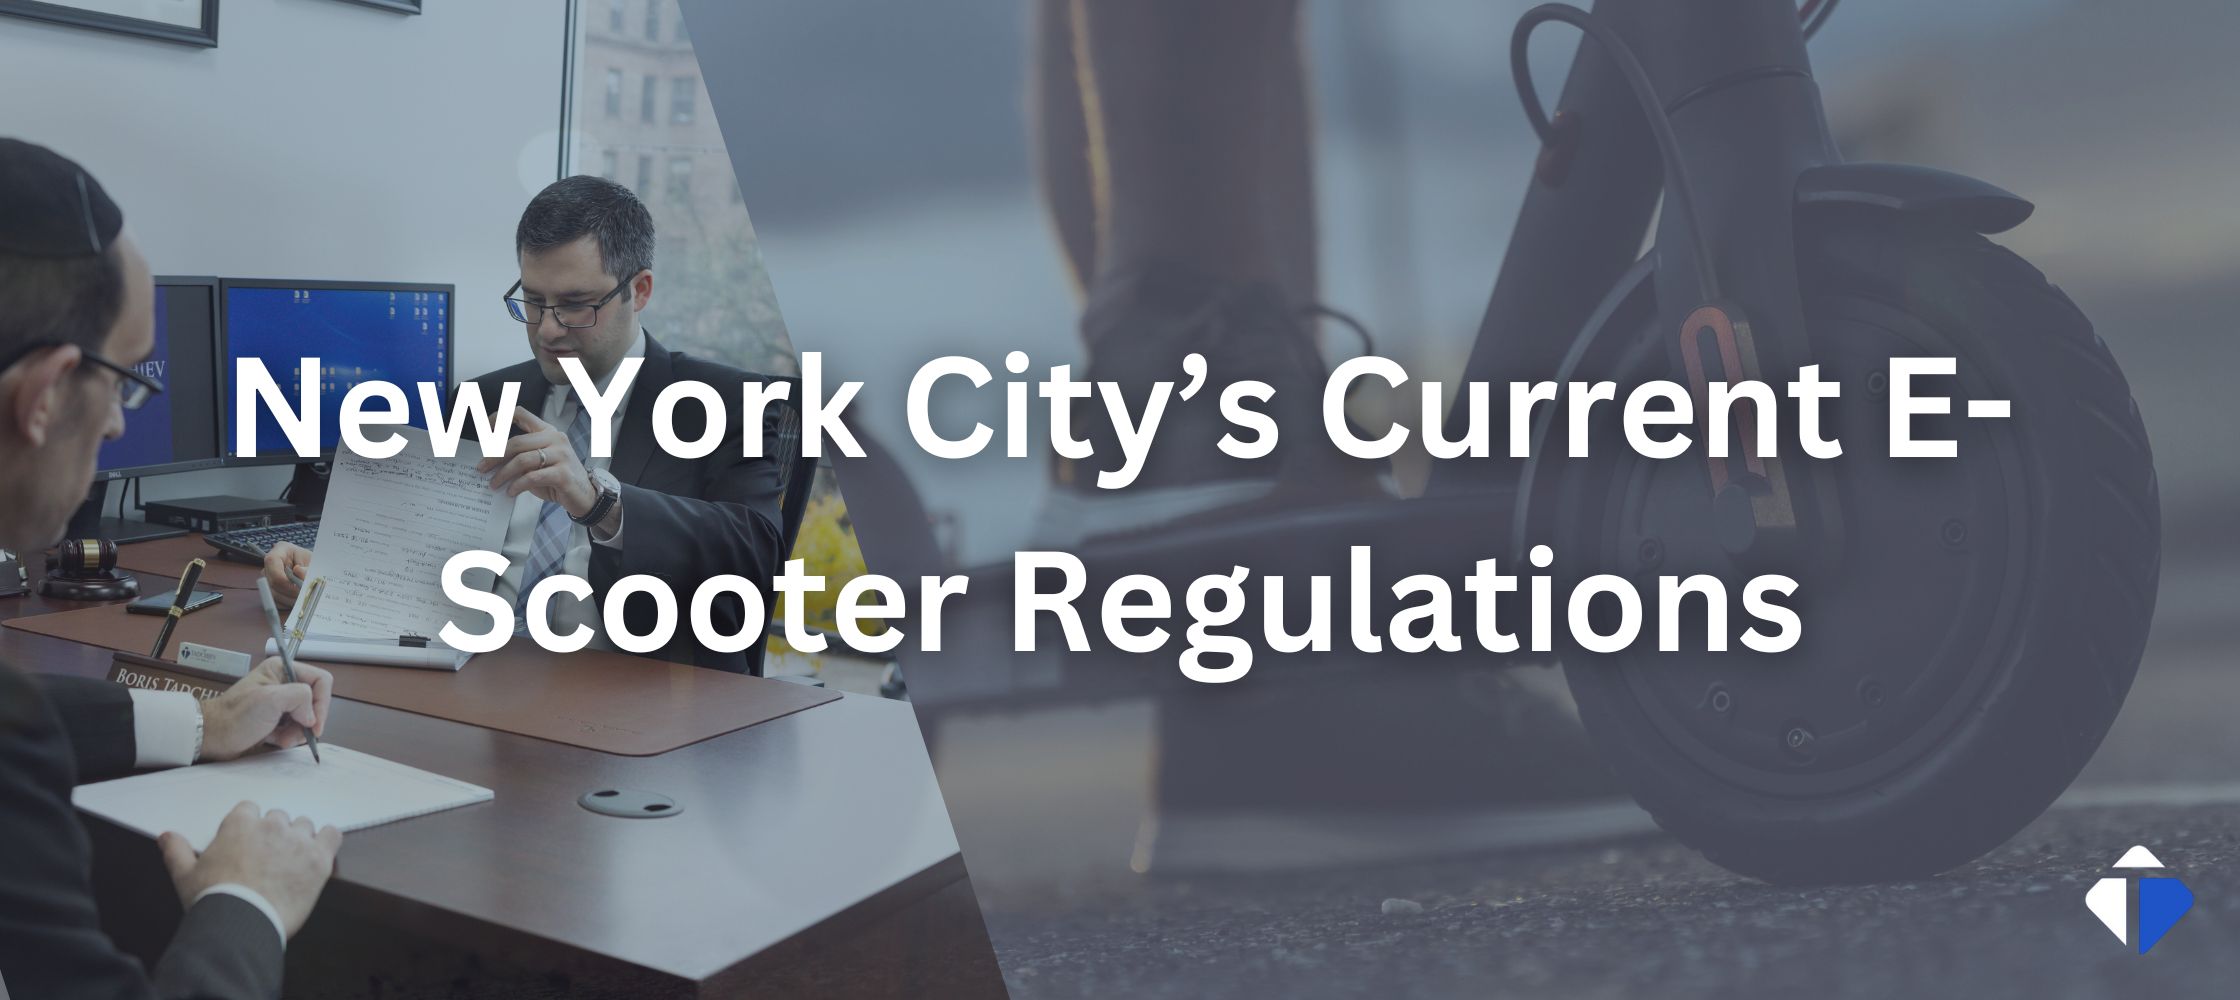 New York City’s Current E-Scooter Regulations for Your Safety